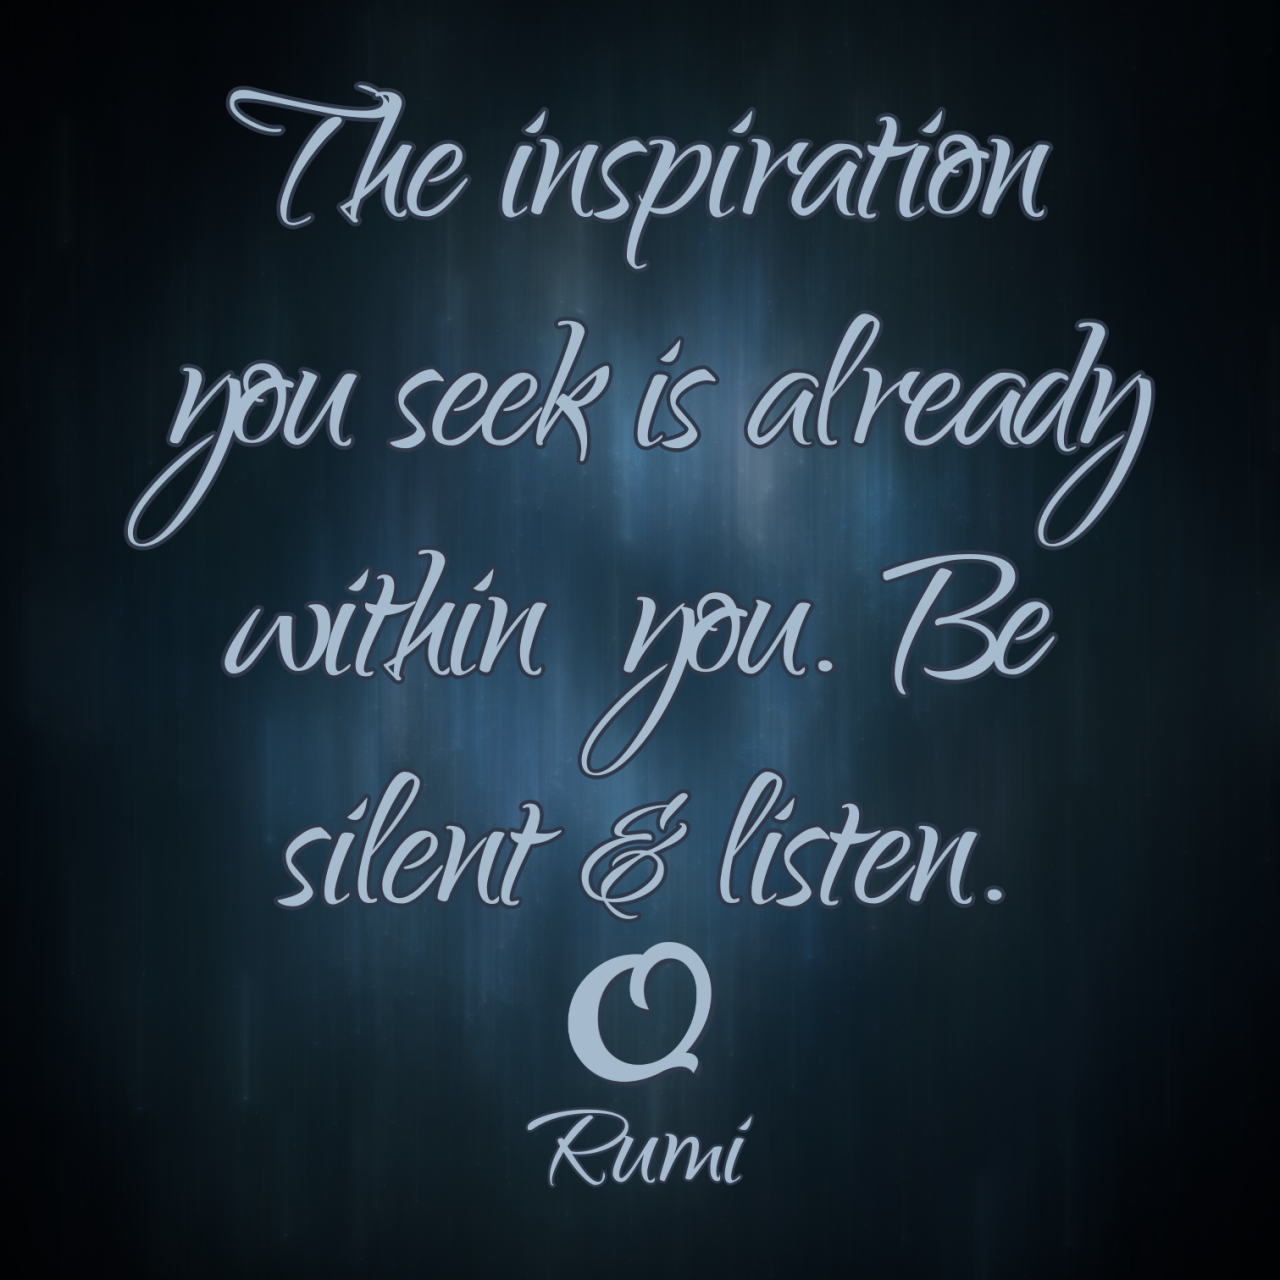 Rumi “The inspiration you seek is already within you. Be silent and listen.”